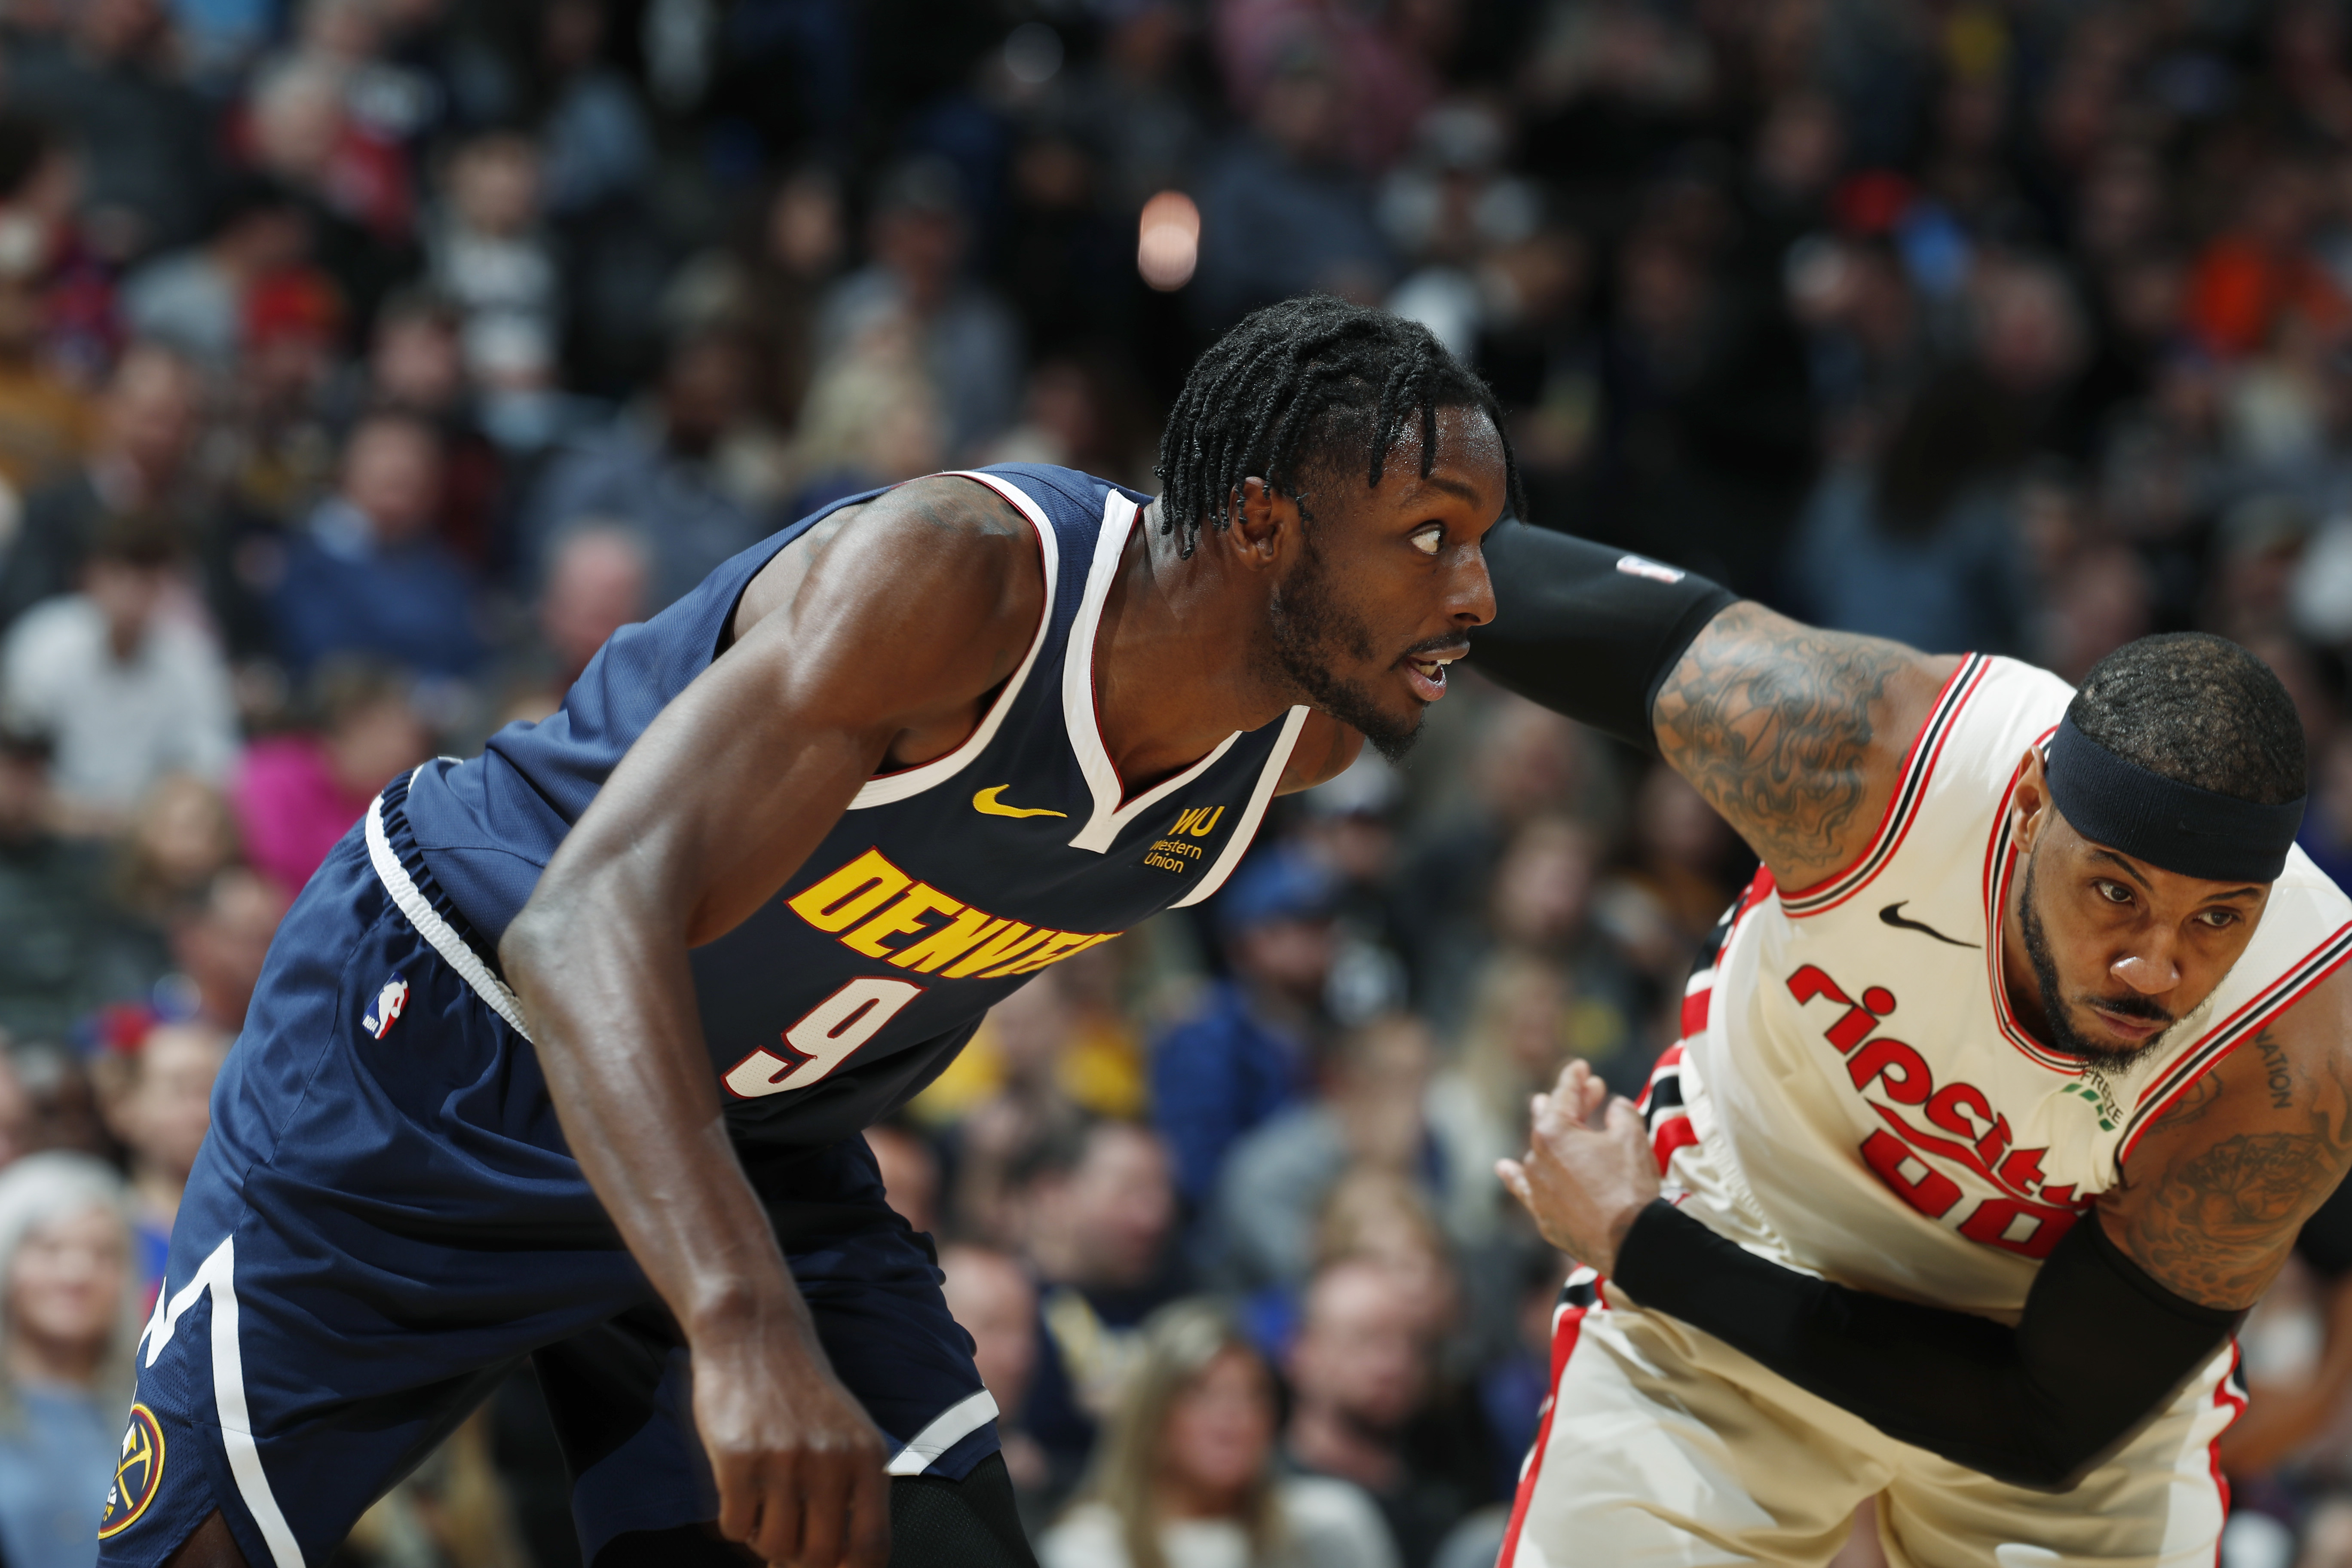 Jokic, Grant lead Nuggets to 114-99 win over Trail Blazers